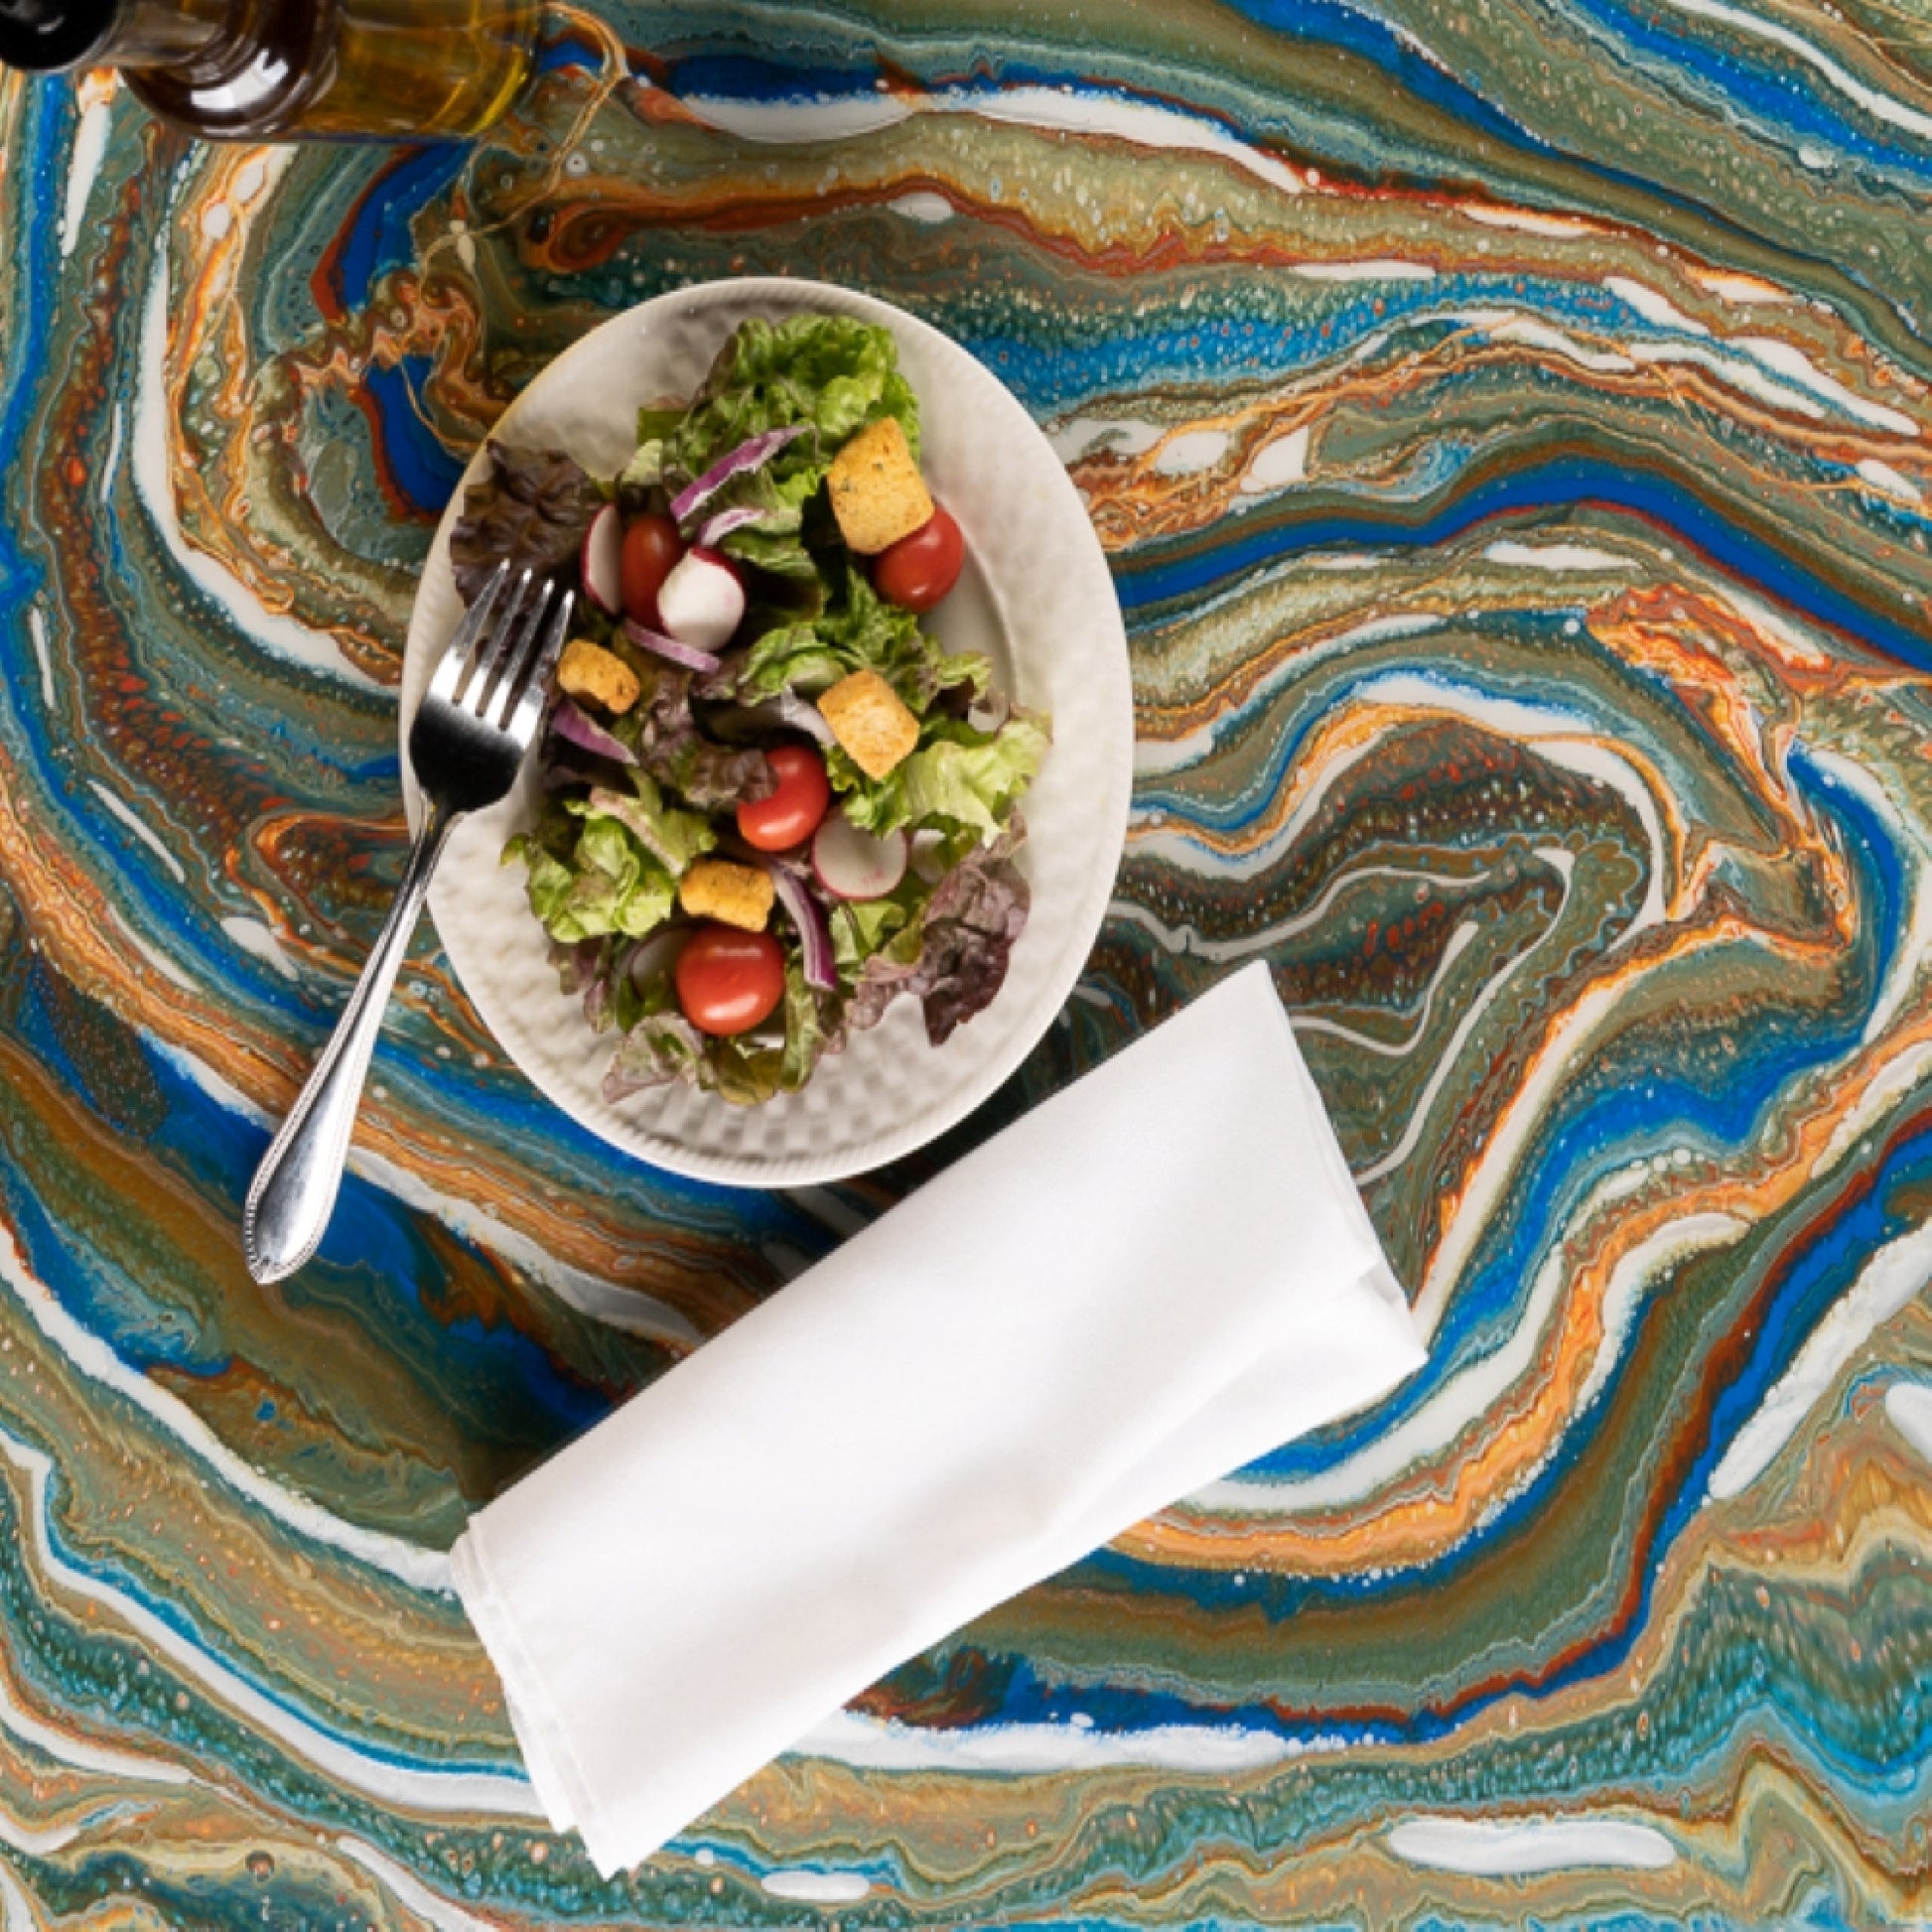 Maui countertop's intricate details showcase the fusion of resins.